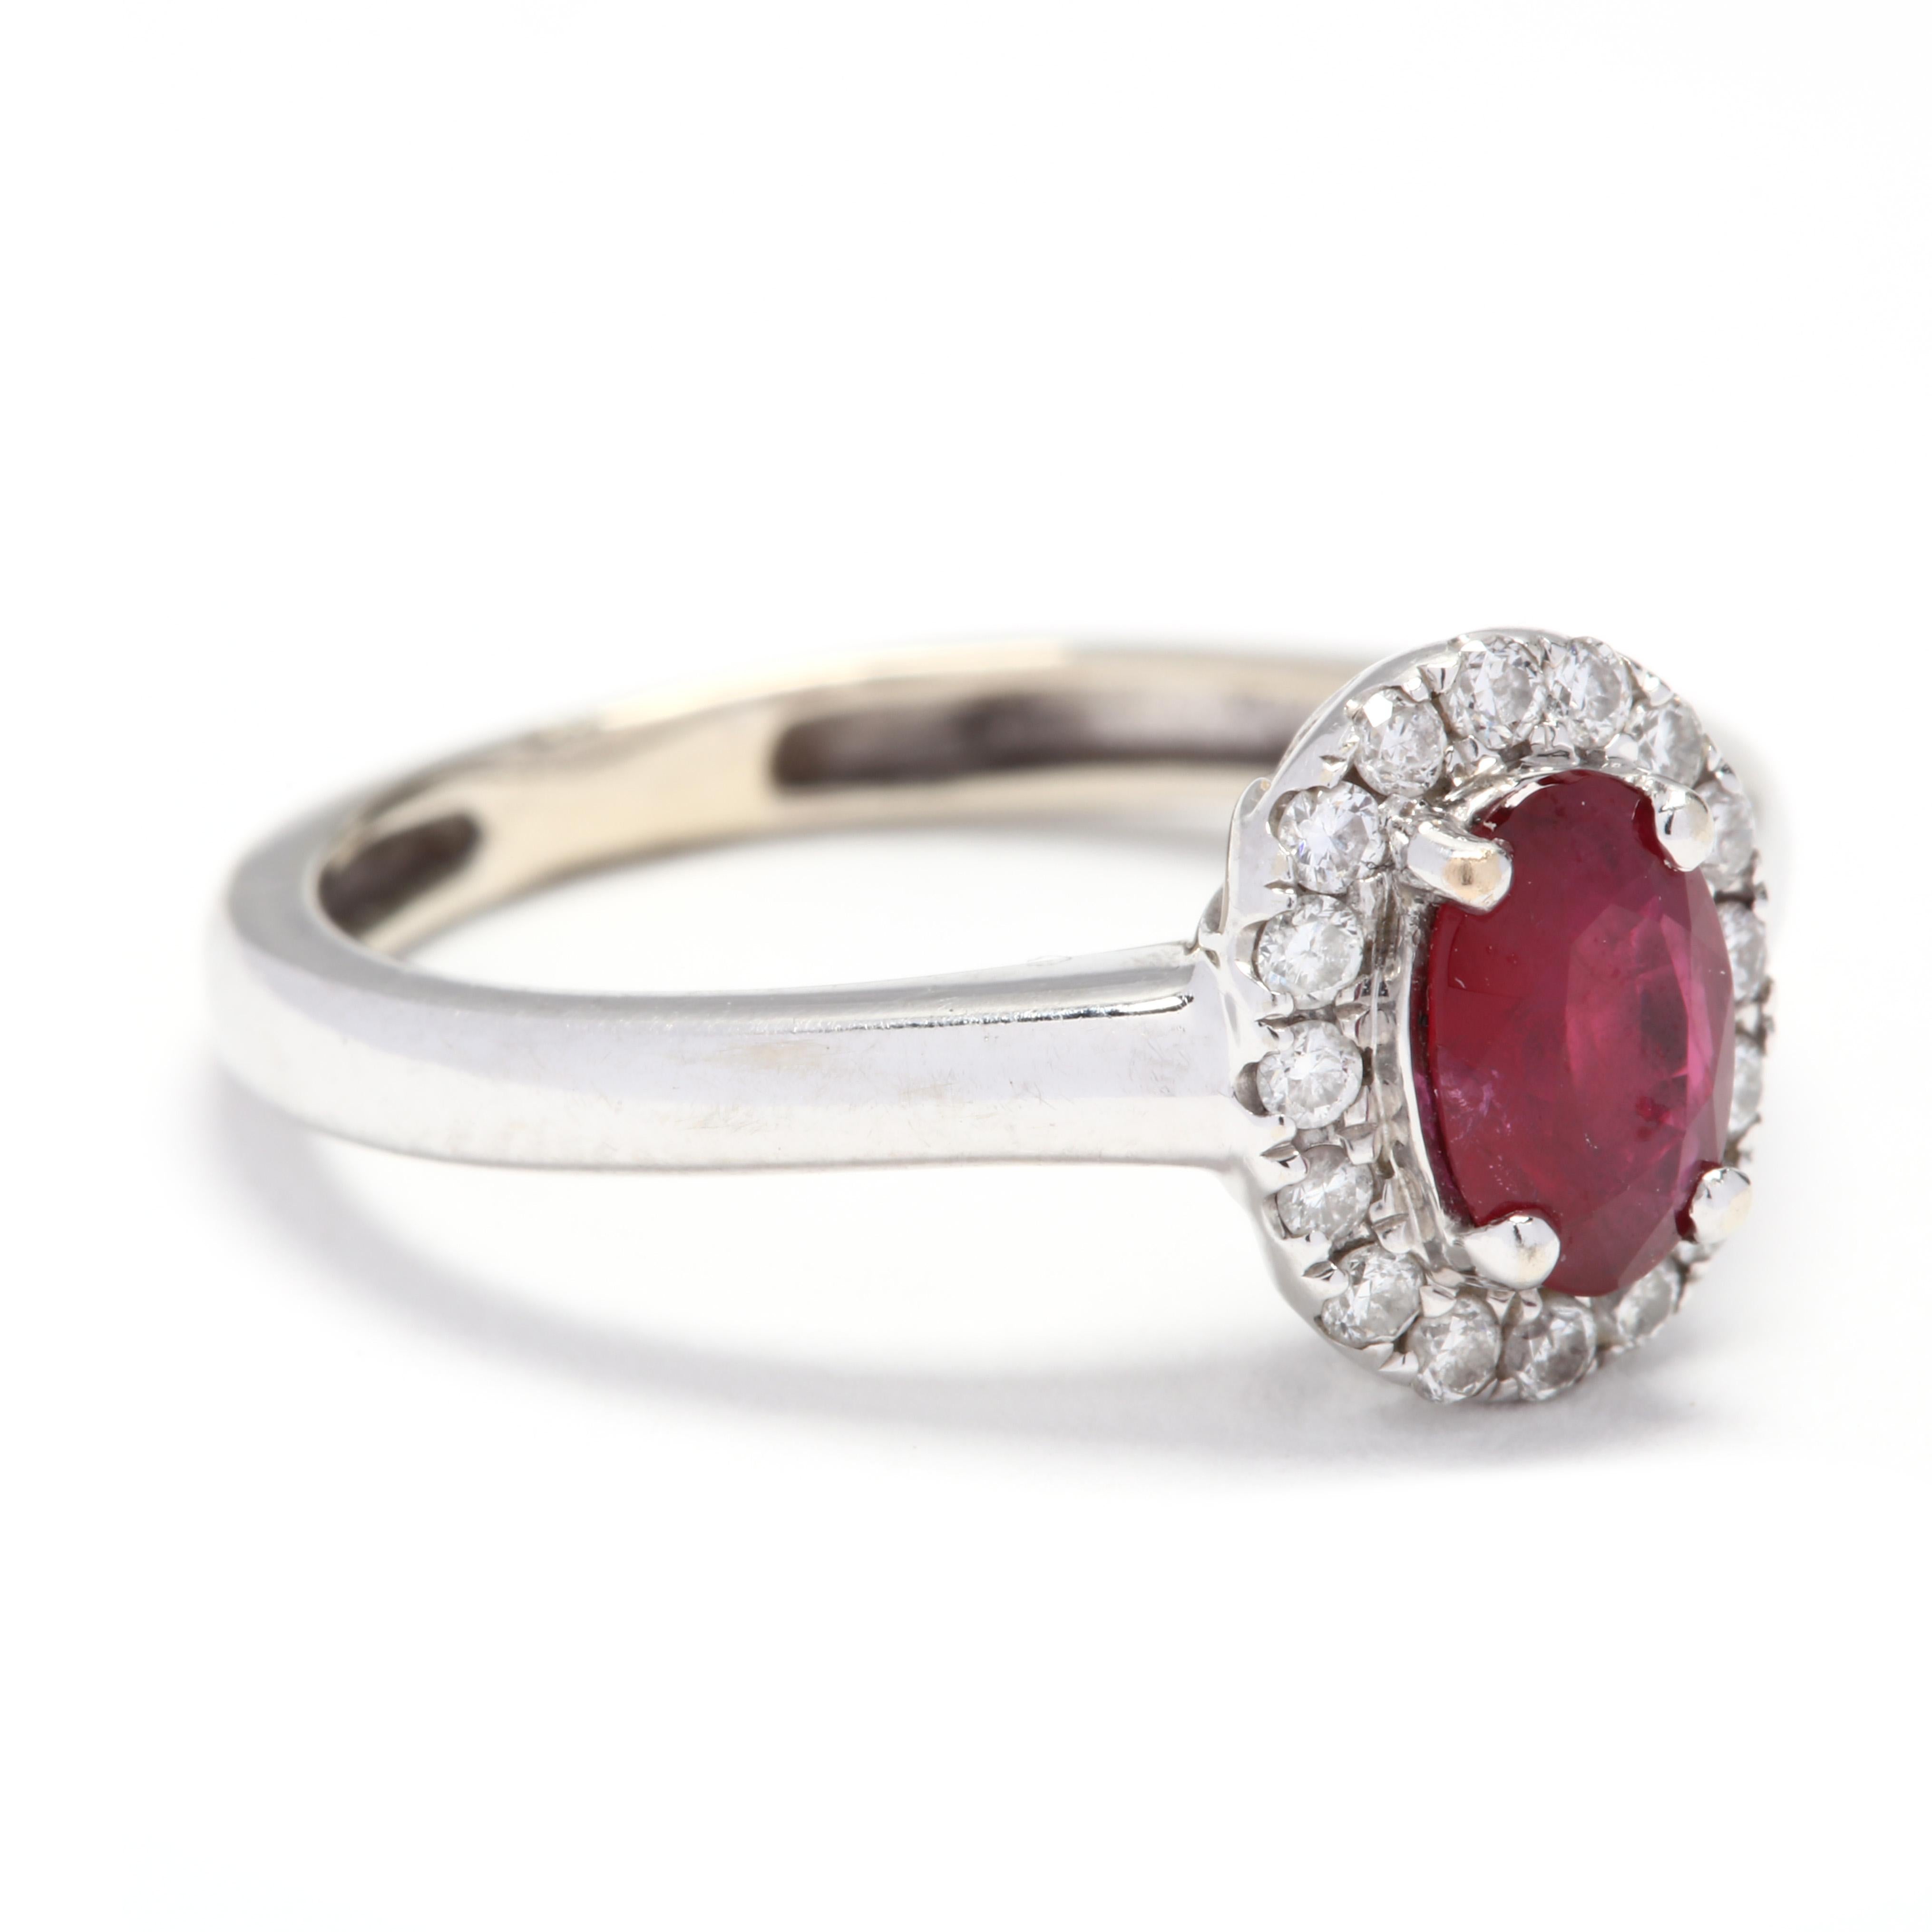 10k white gold oval ruby and diamond halo ring. A timeless diamond halo ring with a 0.60 carat oval ruby in the center. A delicate band makes this dainty and classic! The diamonds weigh approximately 0.12 carats total, are H-I in color and SI in